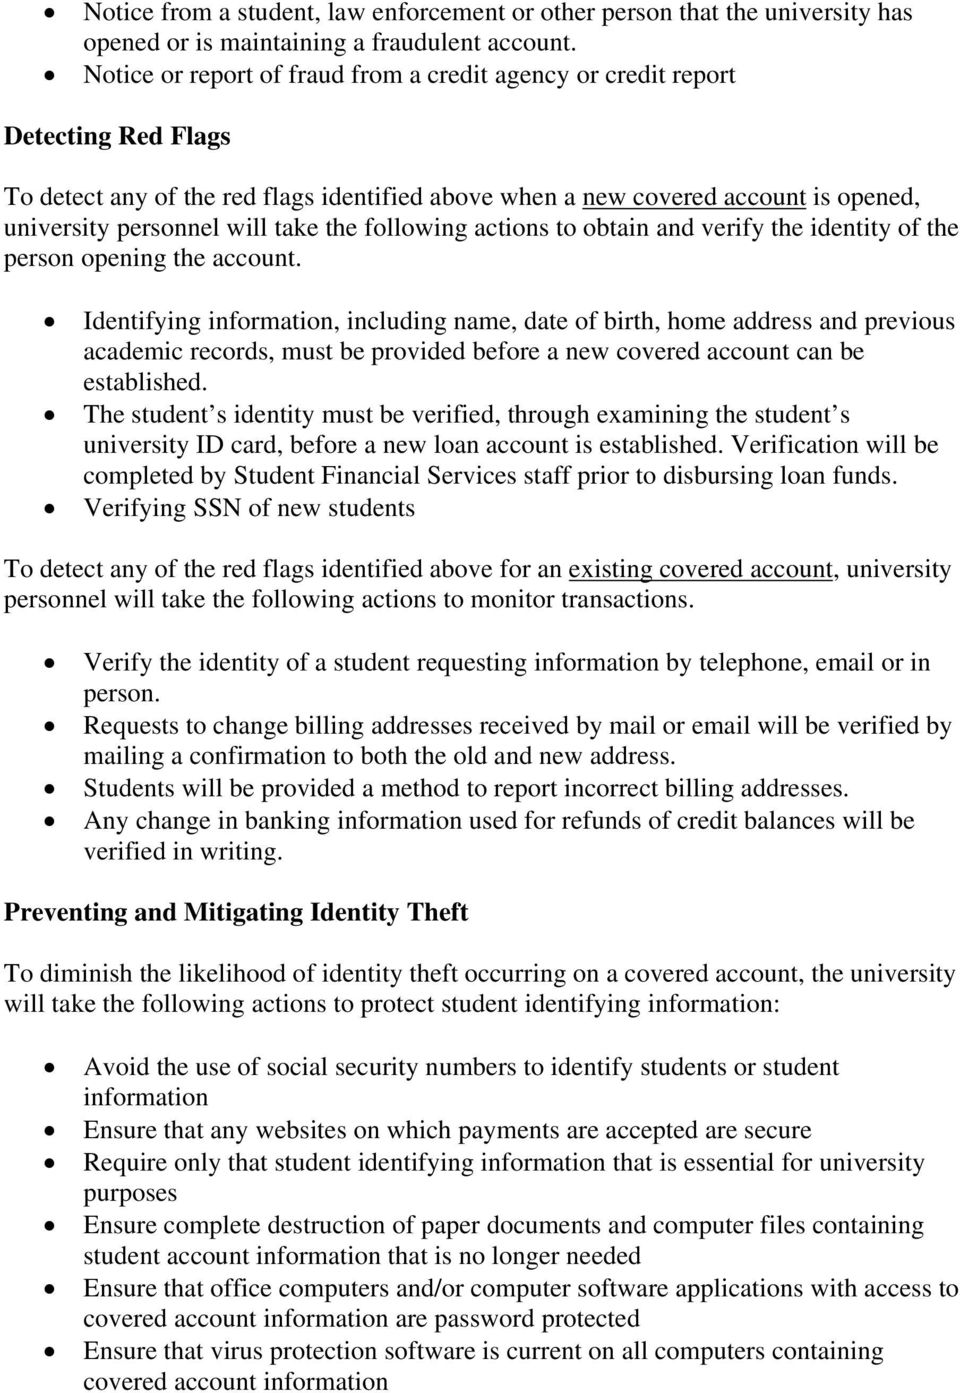 take the following actions to obtain and verify the identity of the person opening the account.